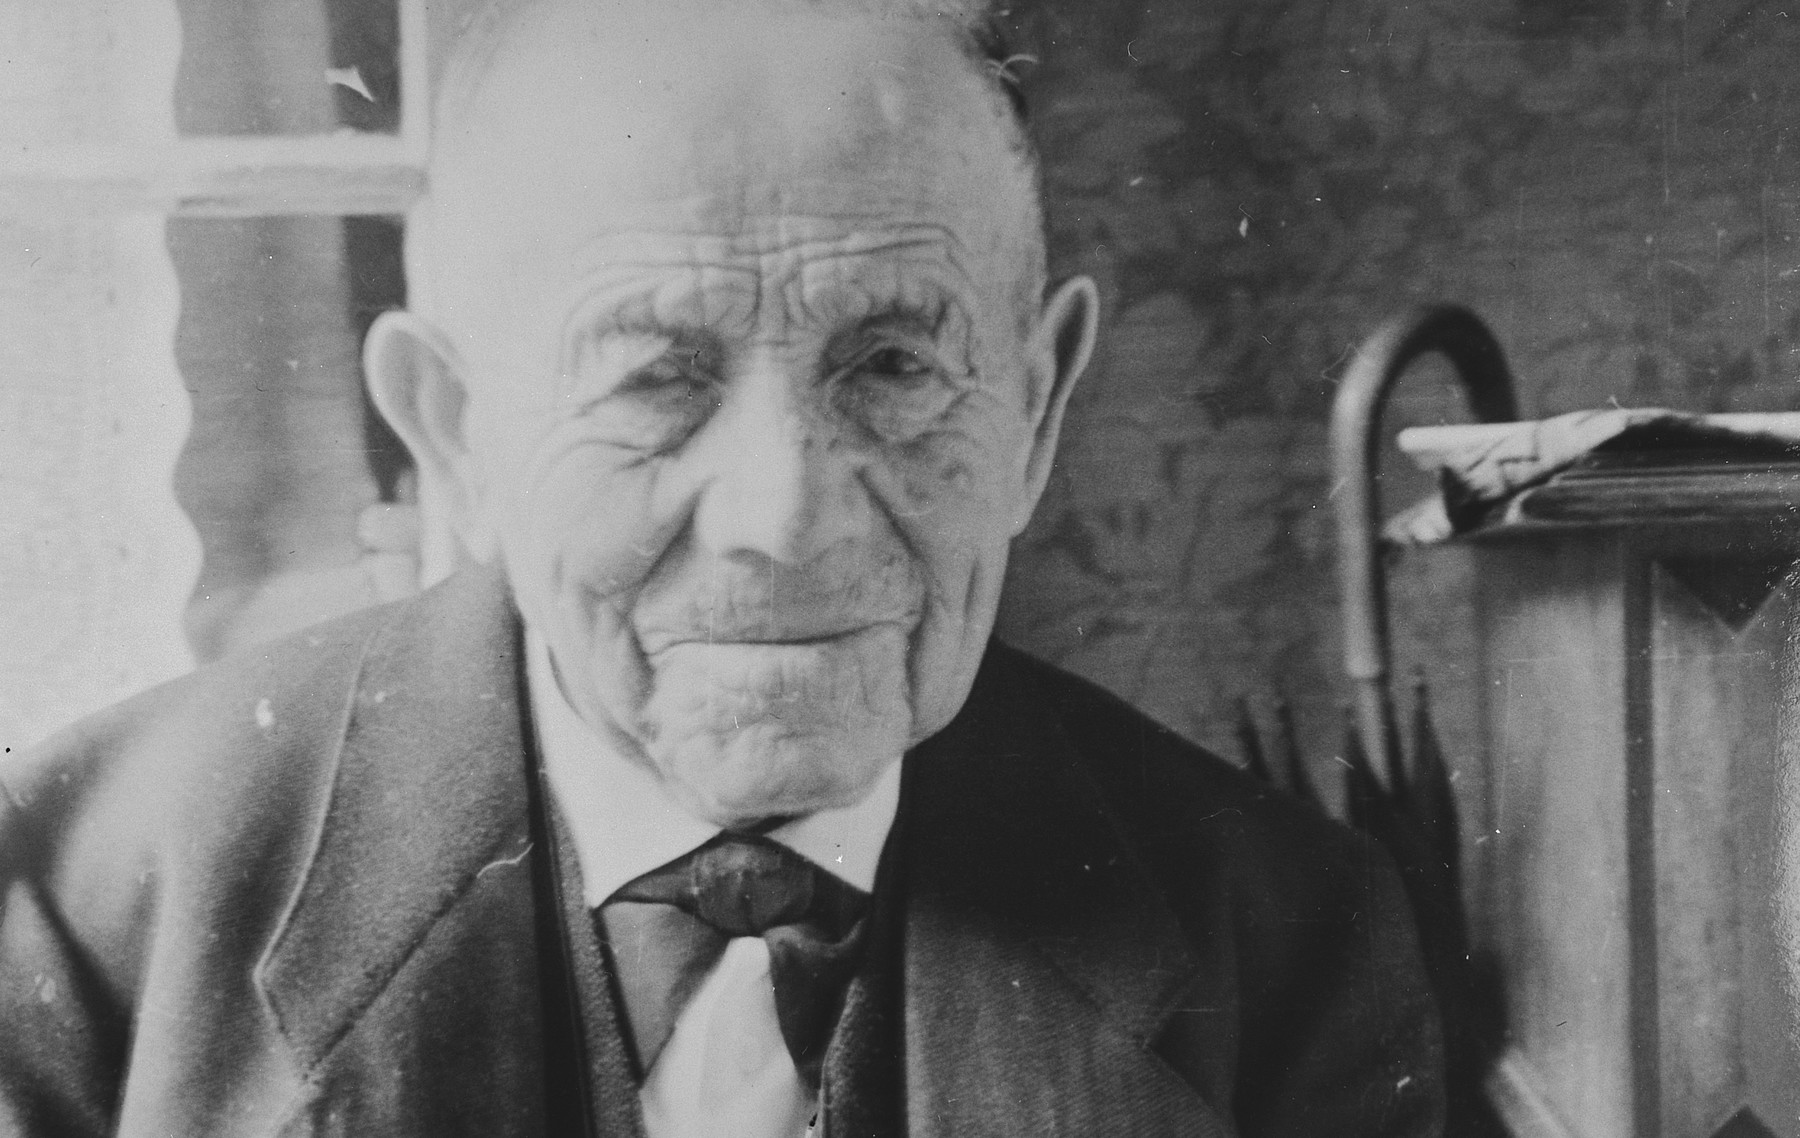 Close-up portrait of a Jewish man in Breisach, Germany.

Pictured is Leopold Geismar.  He was a cousin of the Bährs.  He died in the Jewish Home for the Elderly in Gailingen in July 1939.

This is part of series of photographs taken of the Breisach Jewish community on their way to and from synagogue in 1937.  In October 1940 the entire community was deported to the Gurs internment camp in southern France.